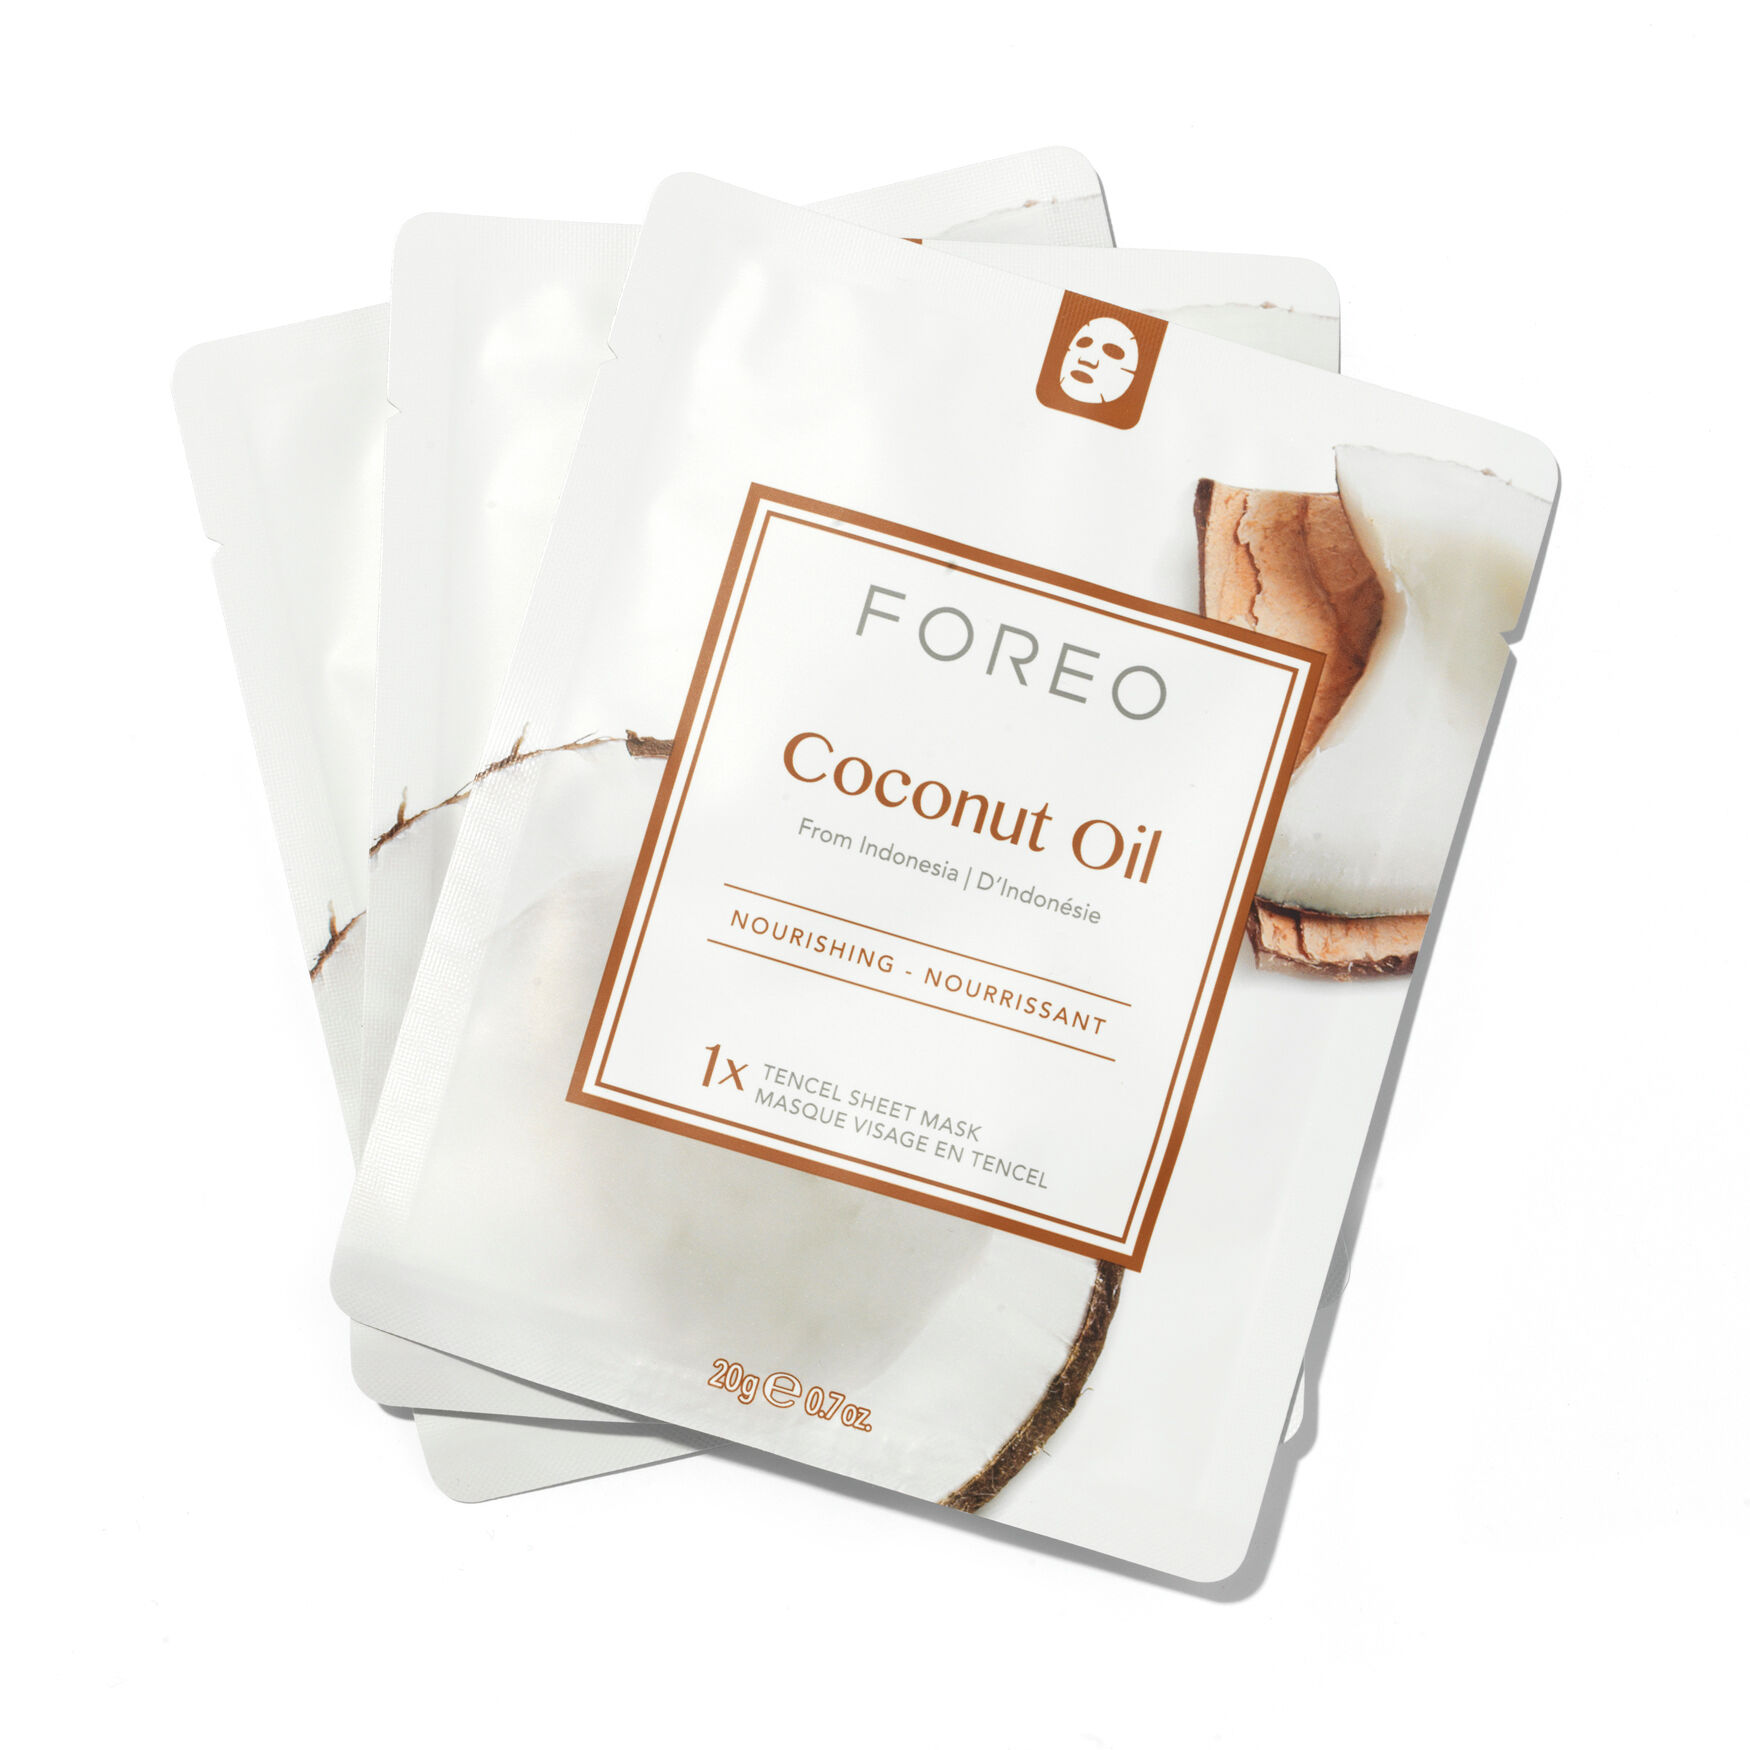 FOREO - Farm To Face Sheet Mask - Coconut Oil